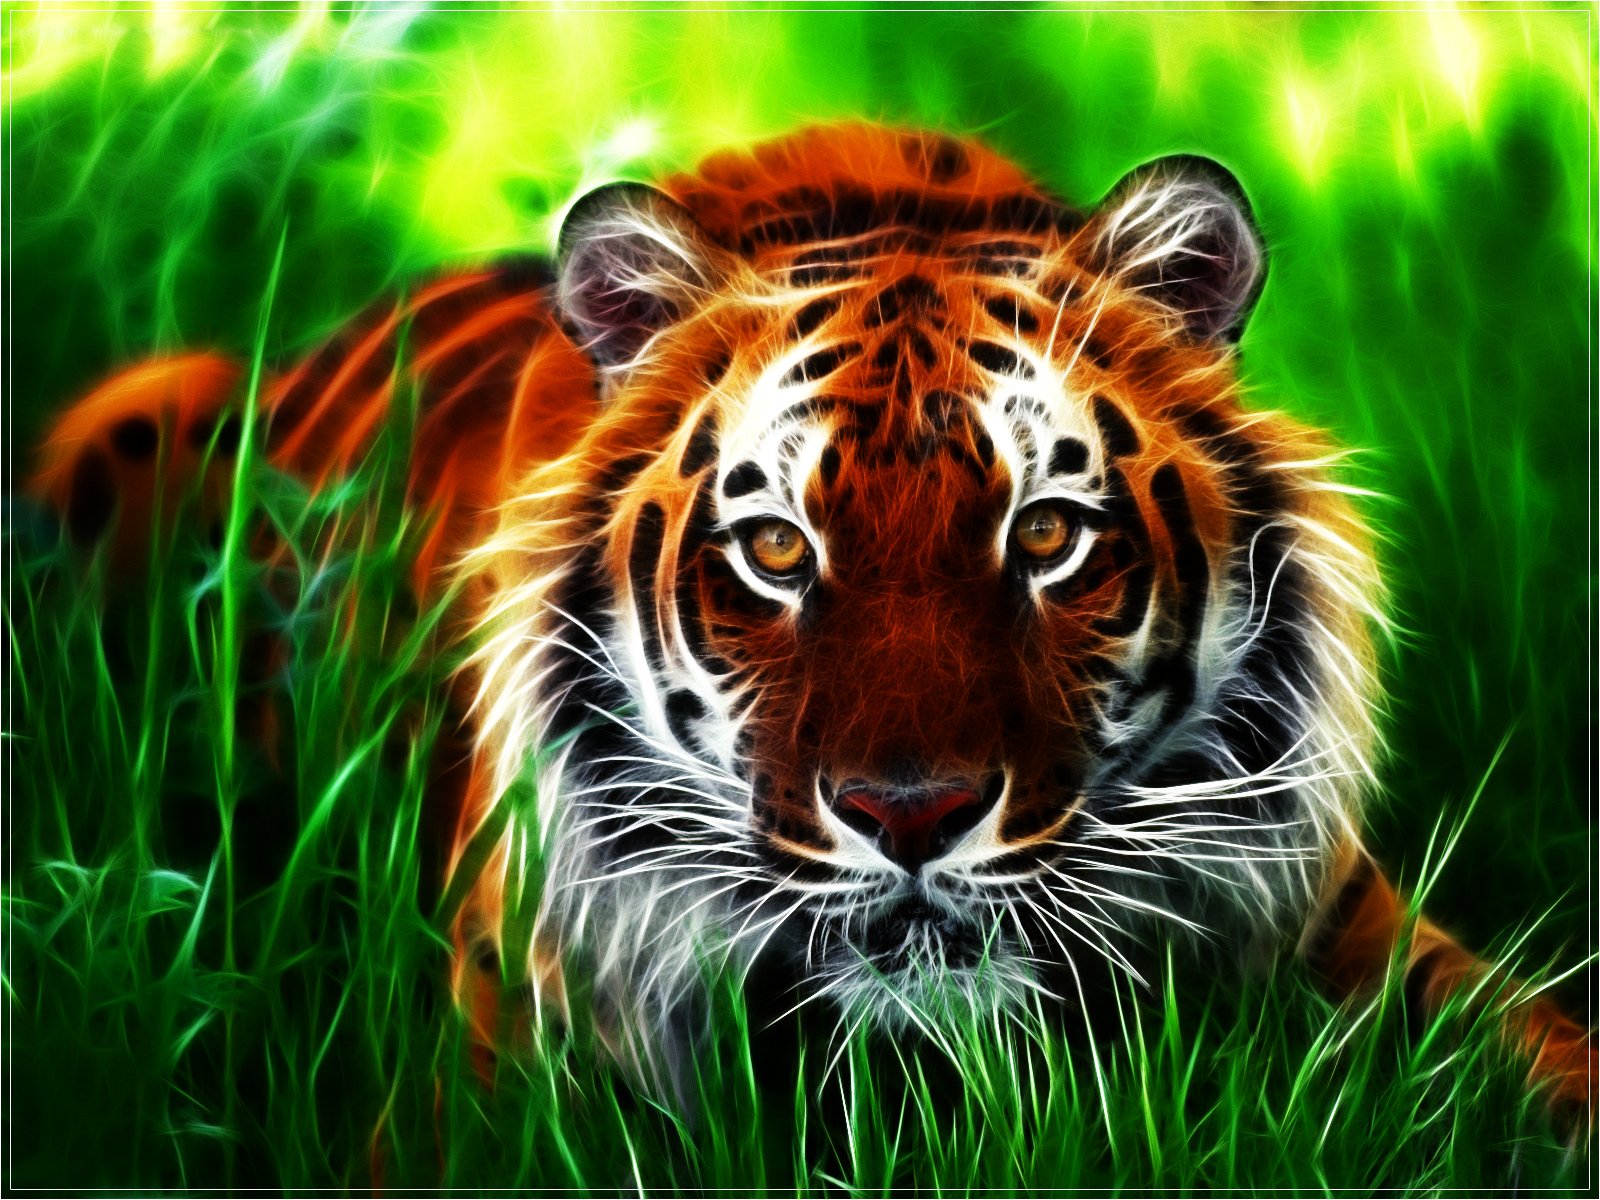  The most beautiful tiger wallpaper Full HD Wallpapers Points 1600x1200